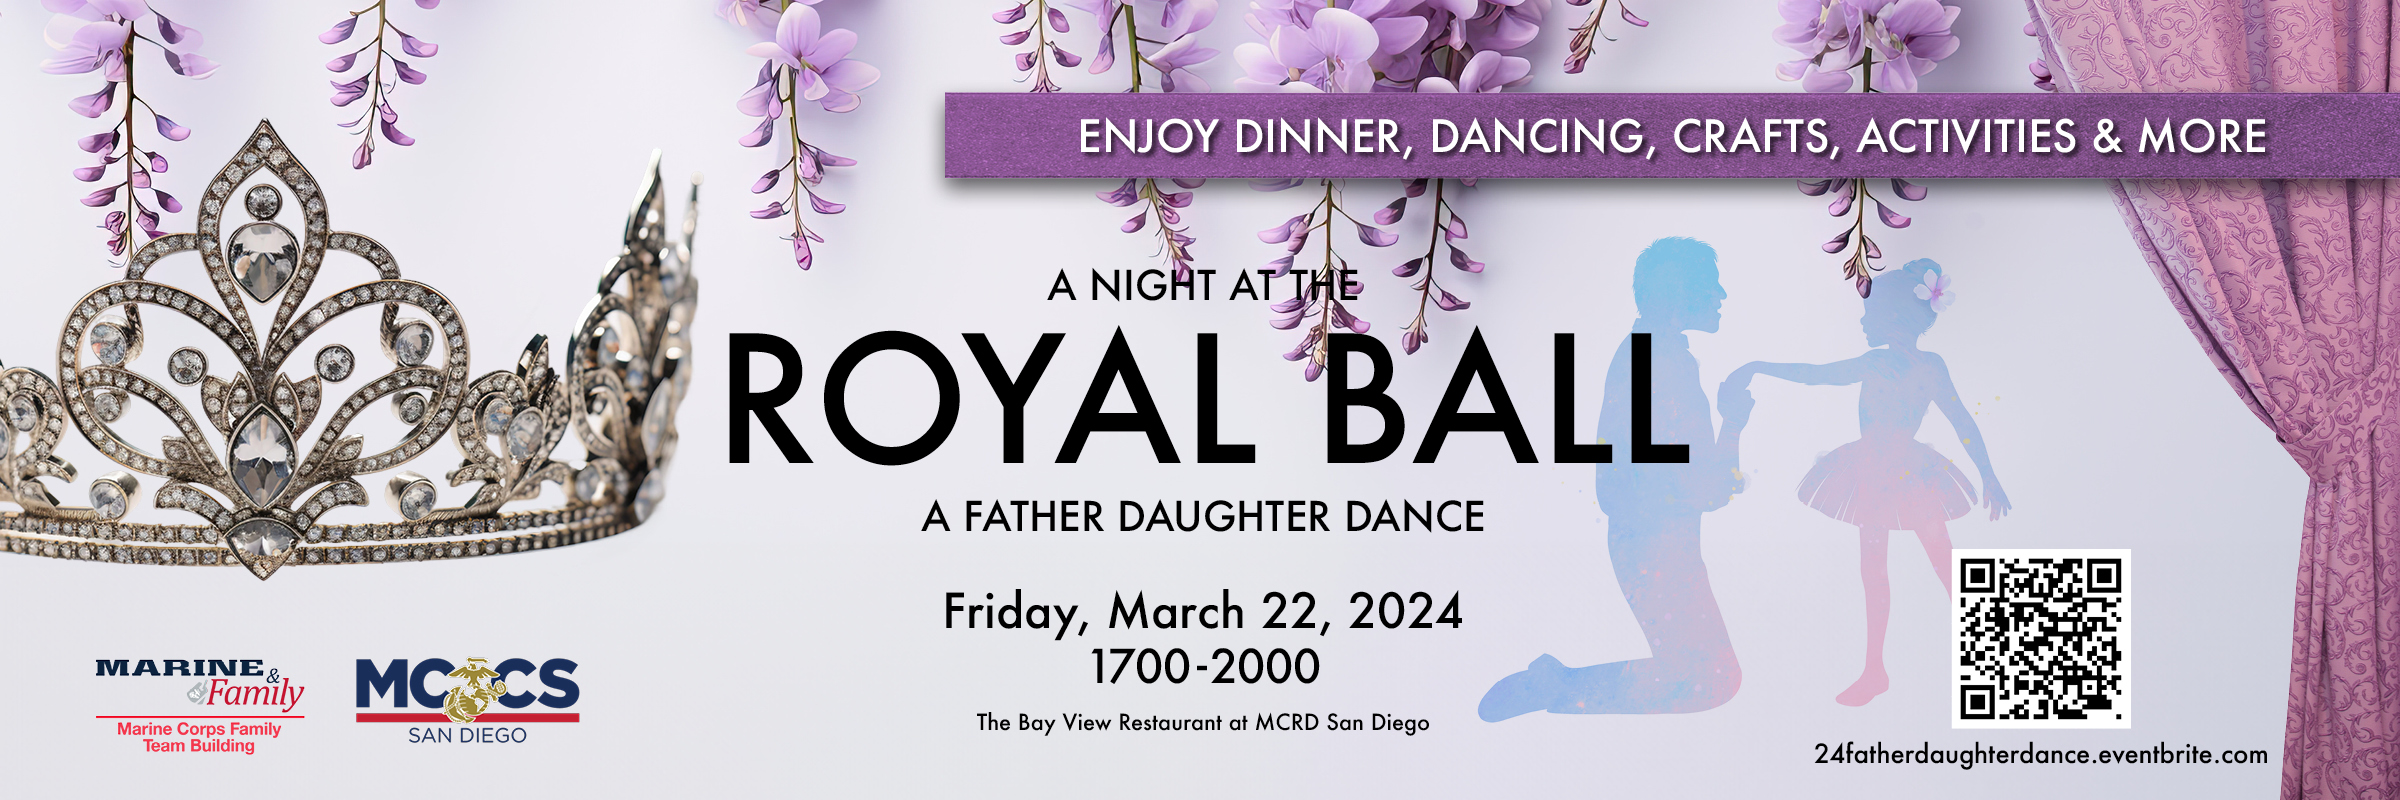 2024 MCRD Father Daughter Royal Ball Save the Date homepage slide 2400x800.jpg